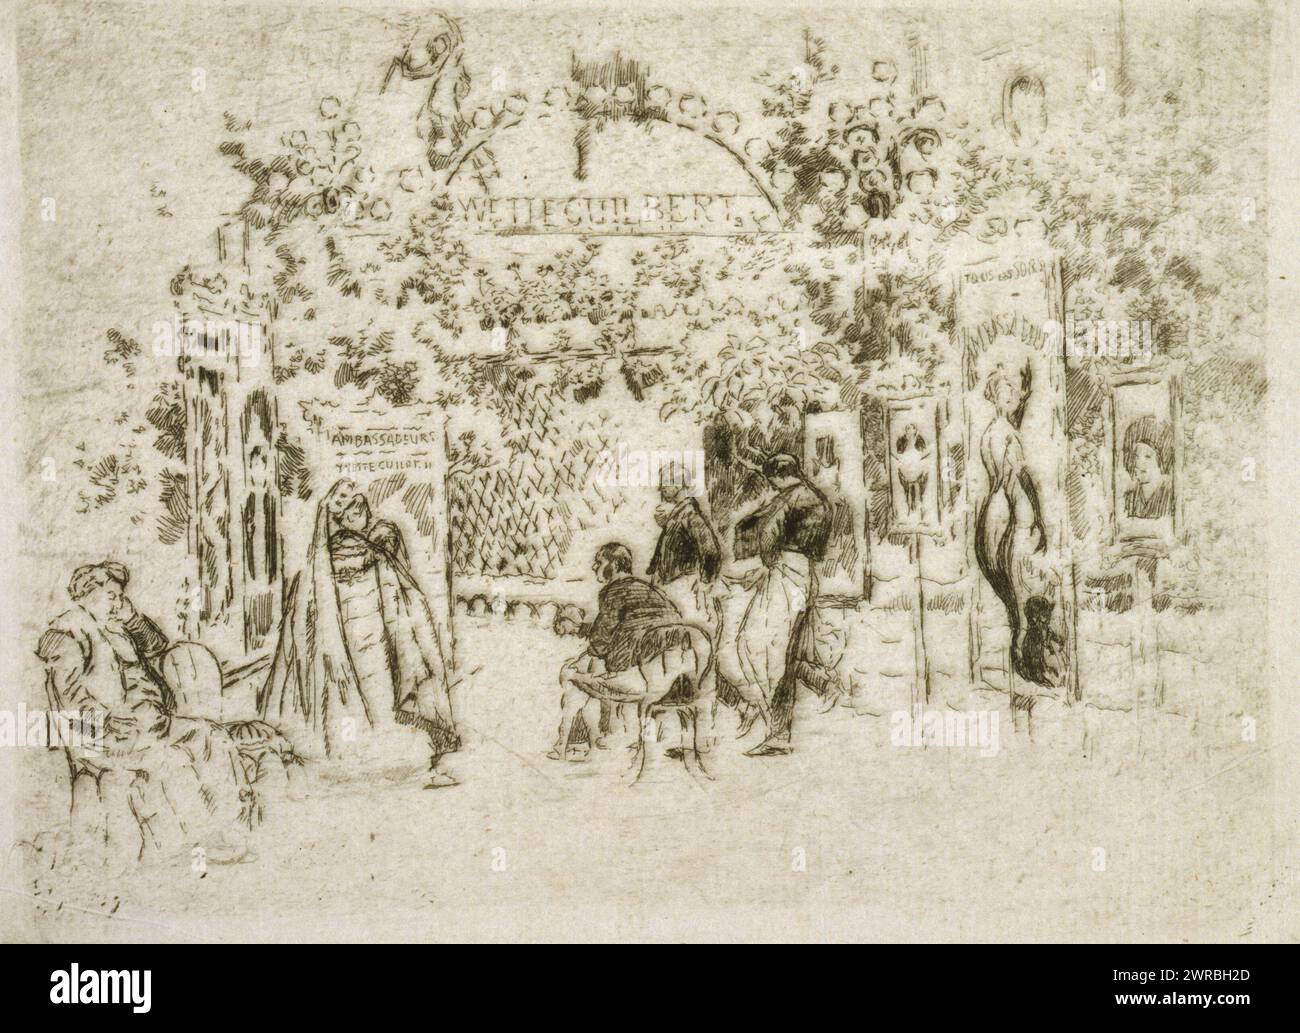 Café chantant, Print shows people seated at entrance to a cafe chantant in Paris, France., Pennell, Joseph, 1857-1926, artist, 1893, Cafes, France, Paris, 1890-1900, Etchings, 1890-1900., Etchings, 1890-1900, 1 print: etching Stock Photo